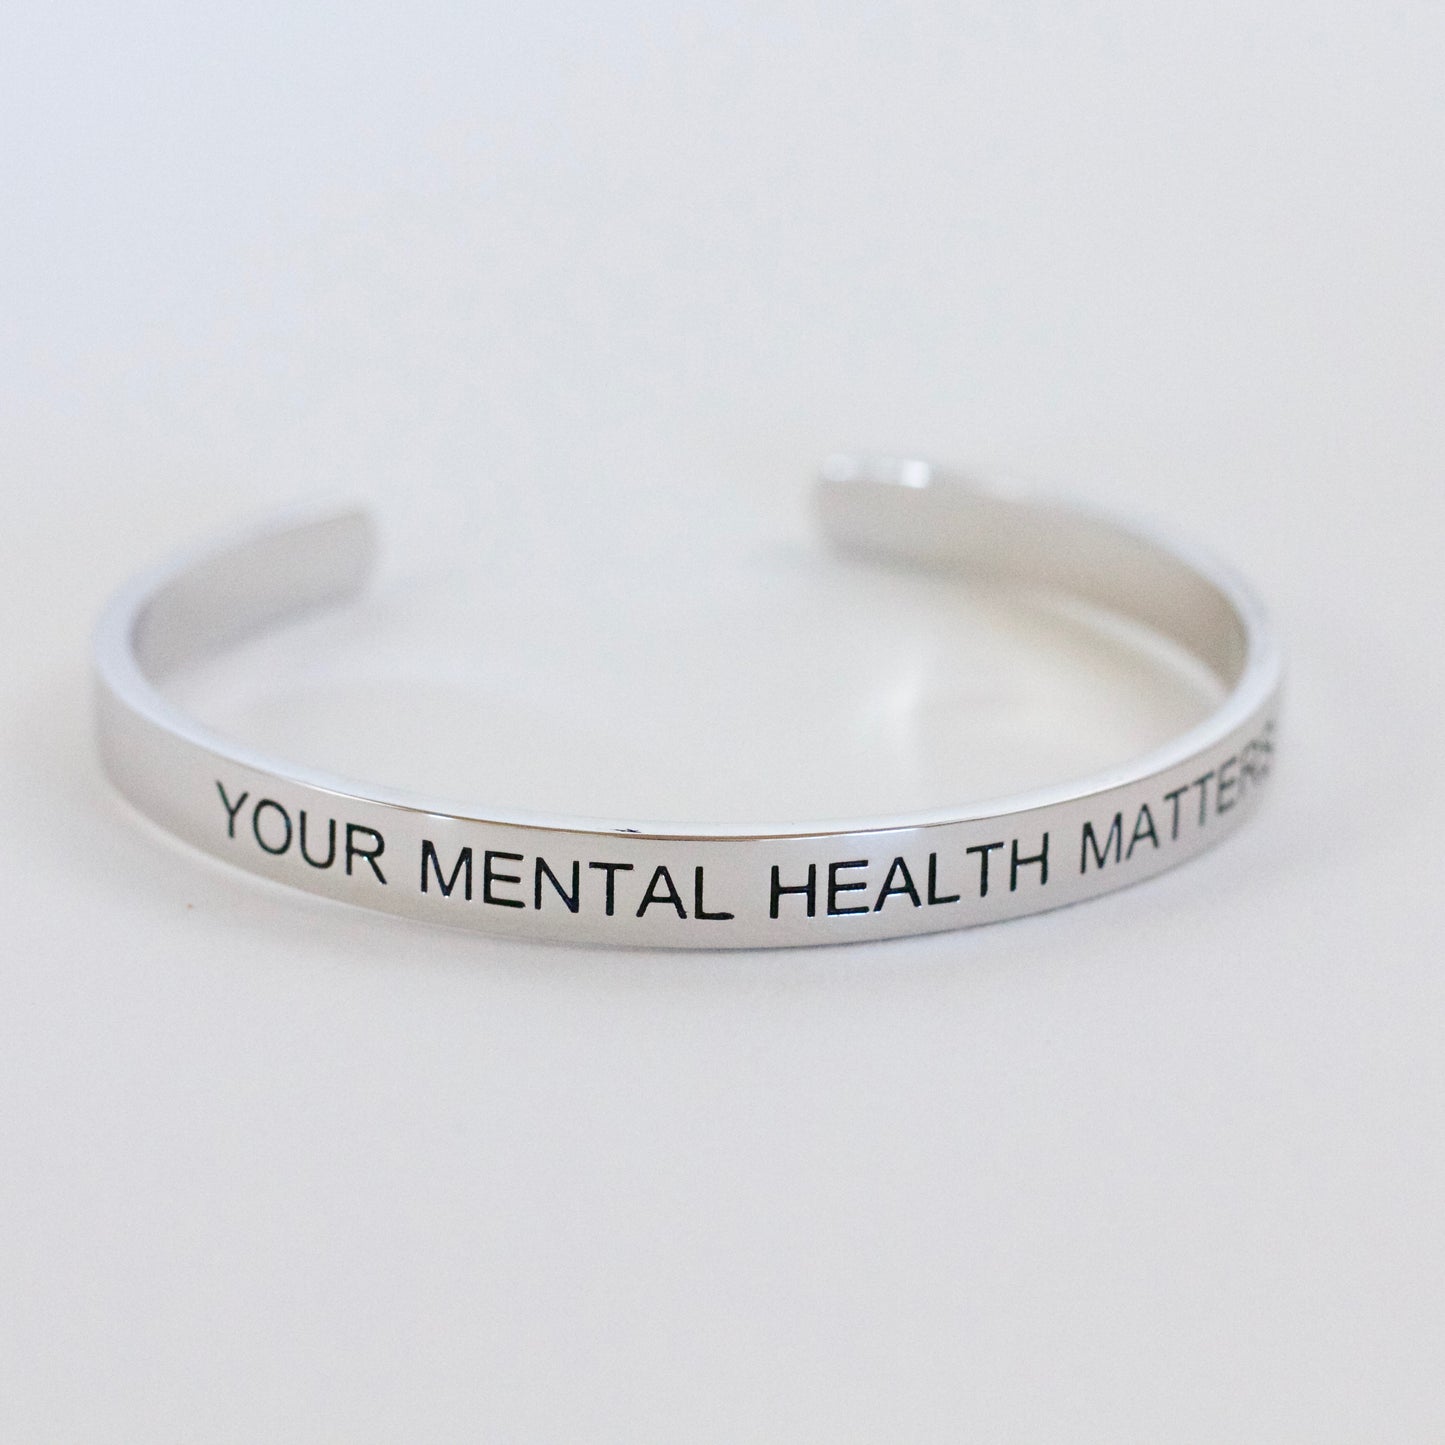 YOUR MENTAL HEALTH MATTERS